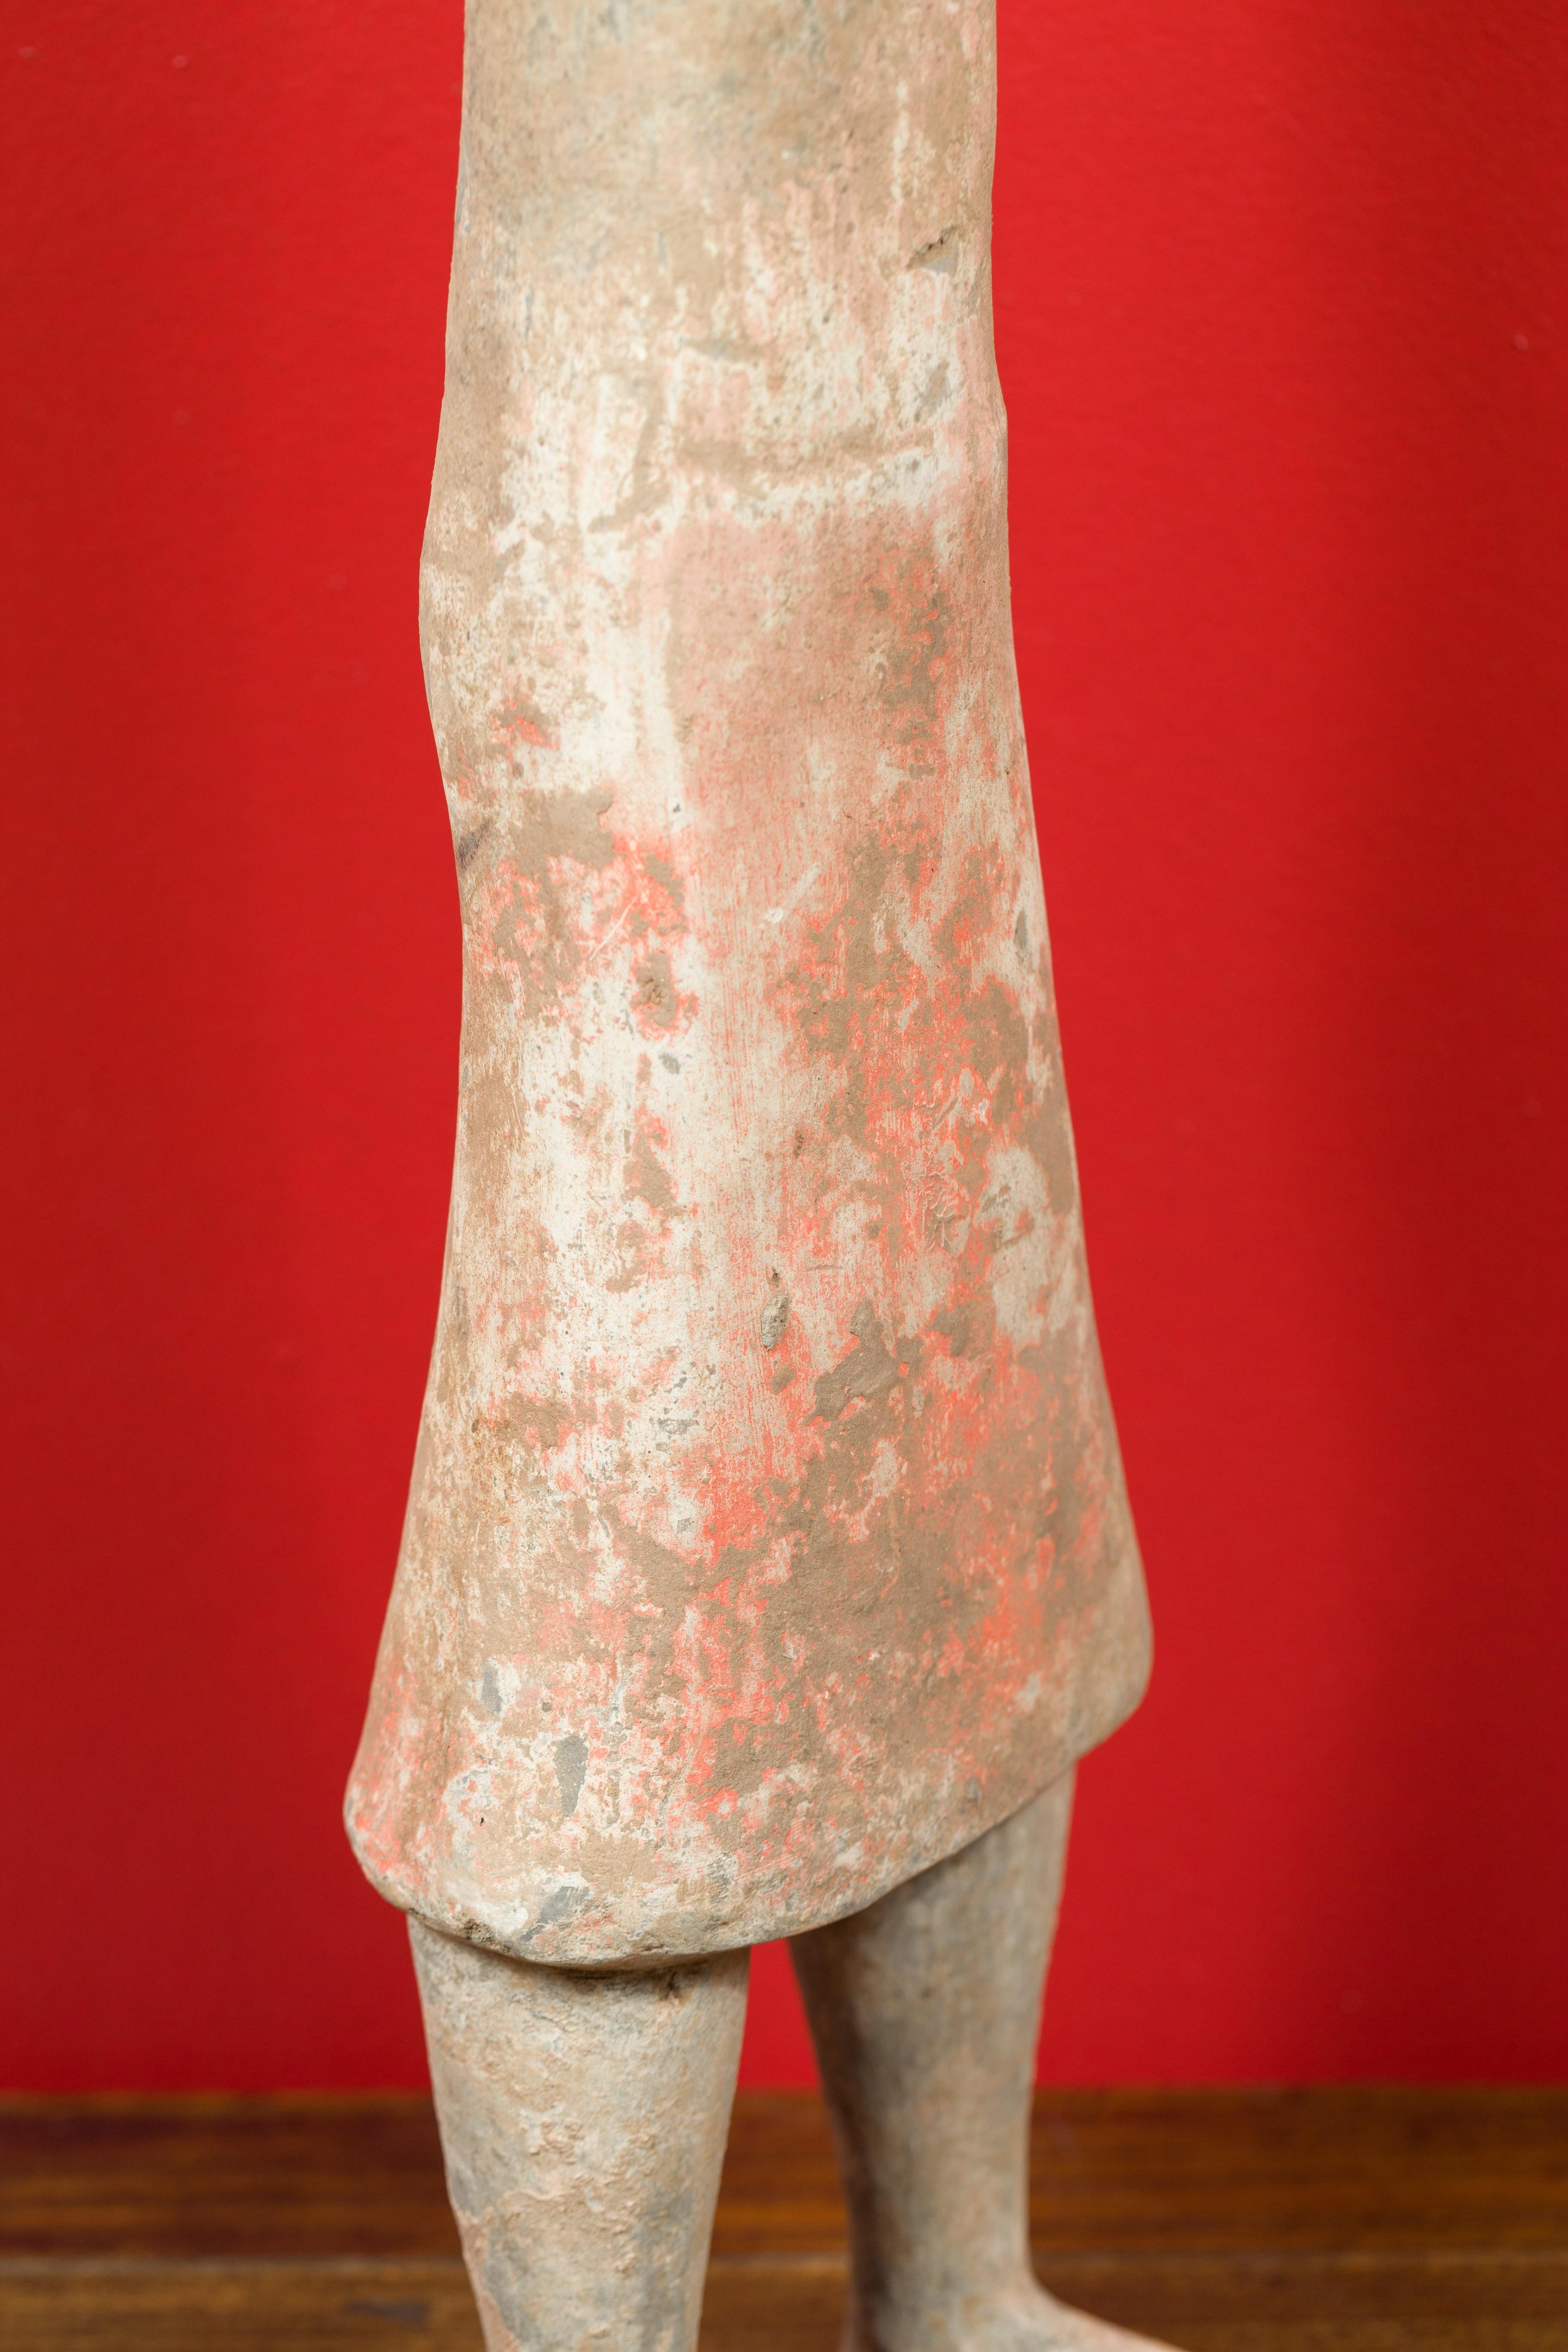 18th Century and Earlier Western Han Dynasty 206 BC-24 AD Chinese Figurine with Original Polychromy